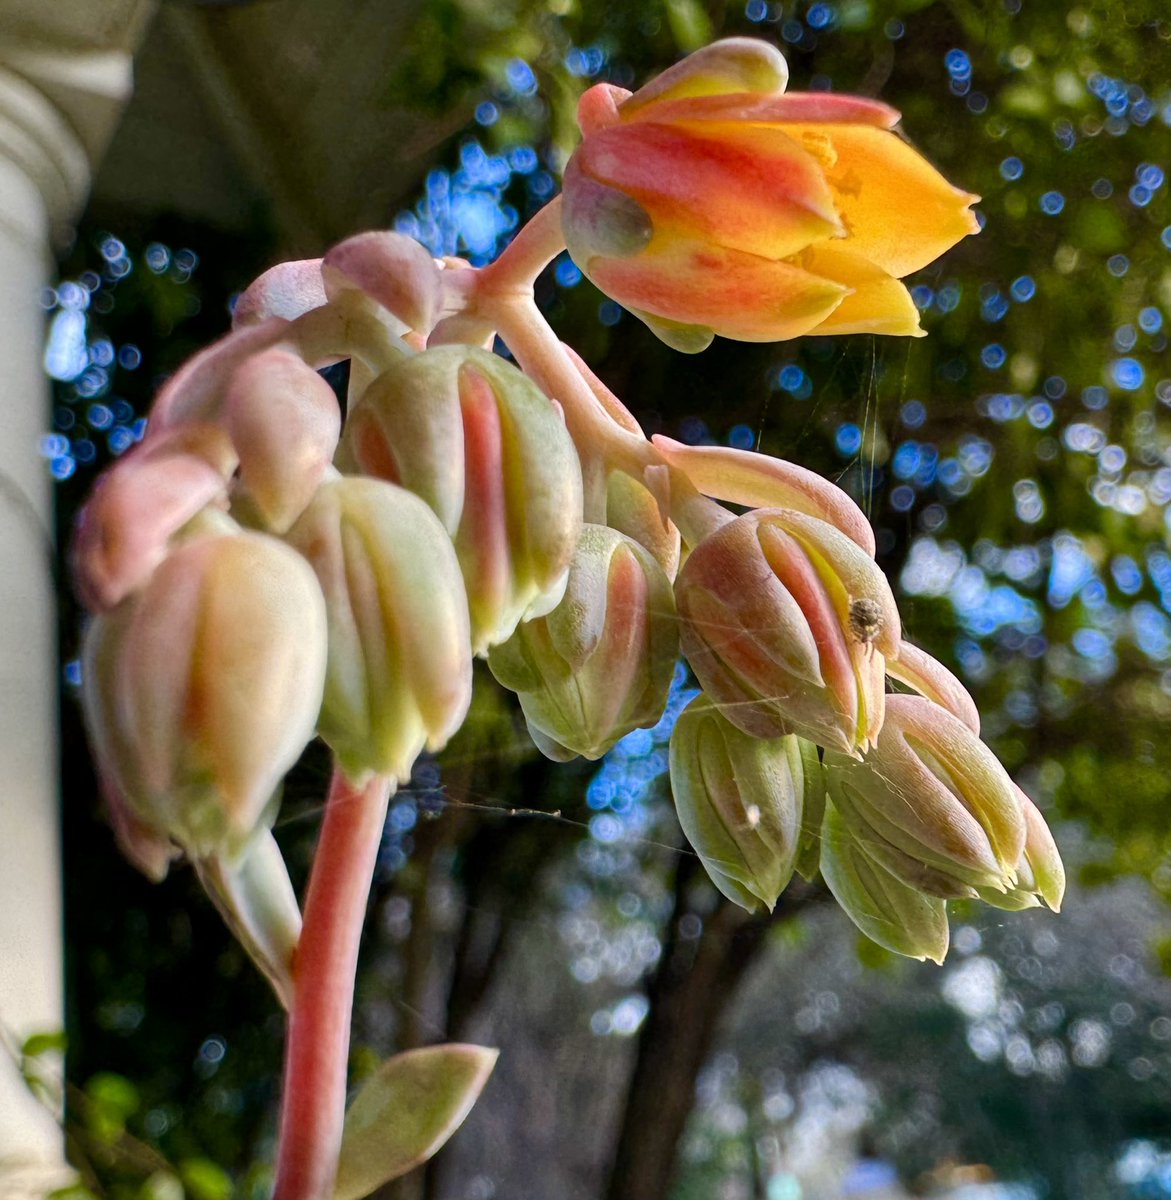 #Succulent blooms for #FlowersOnFriday